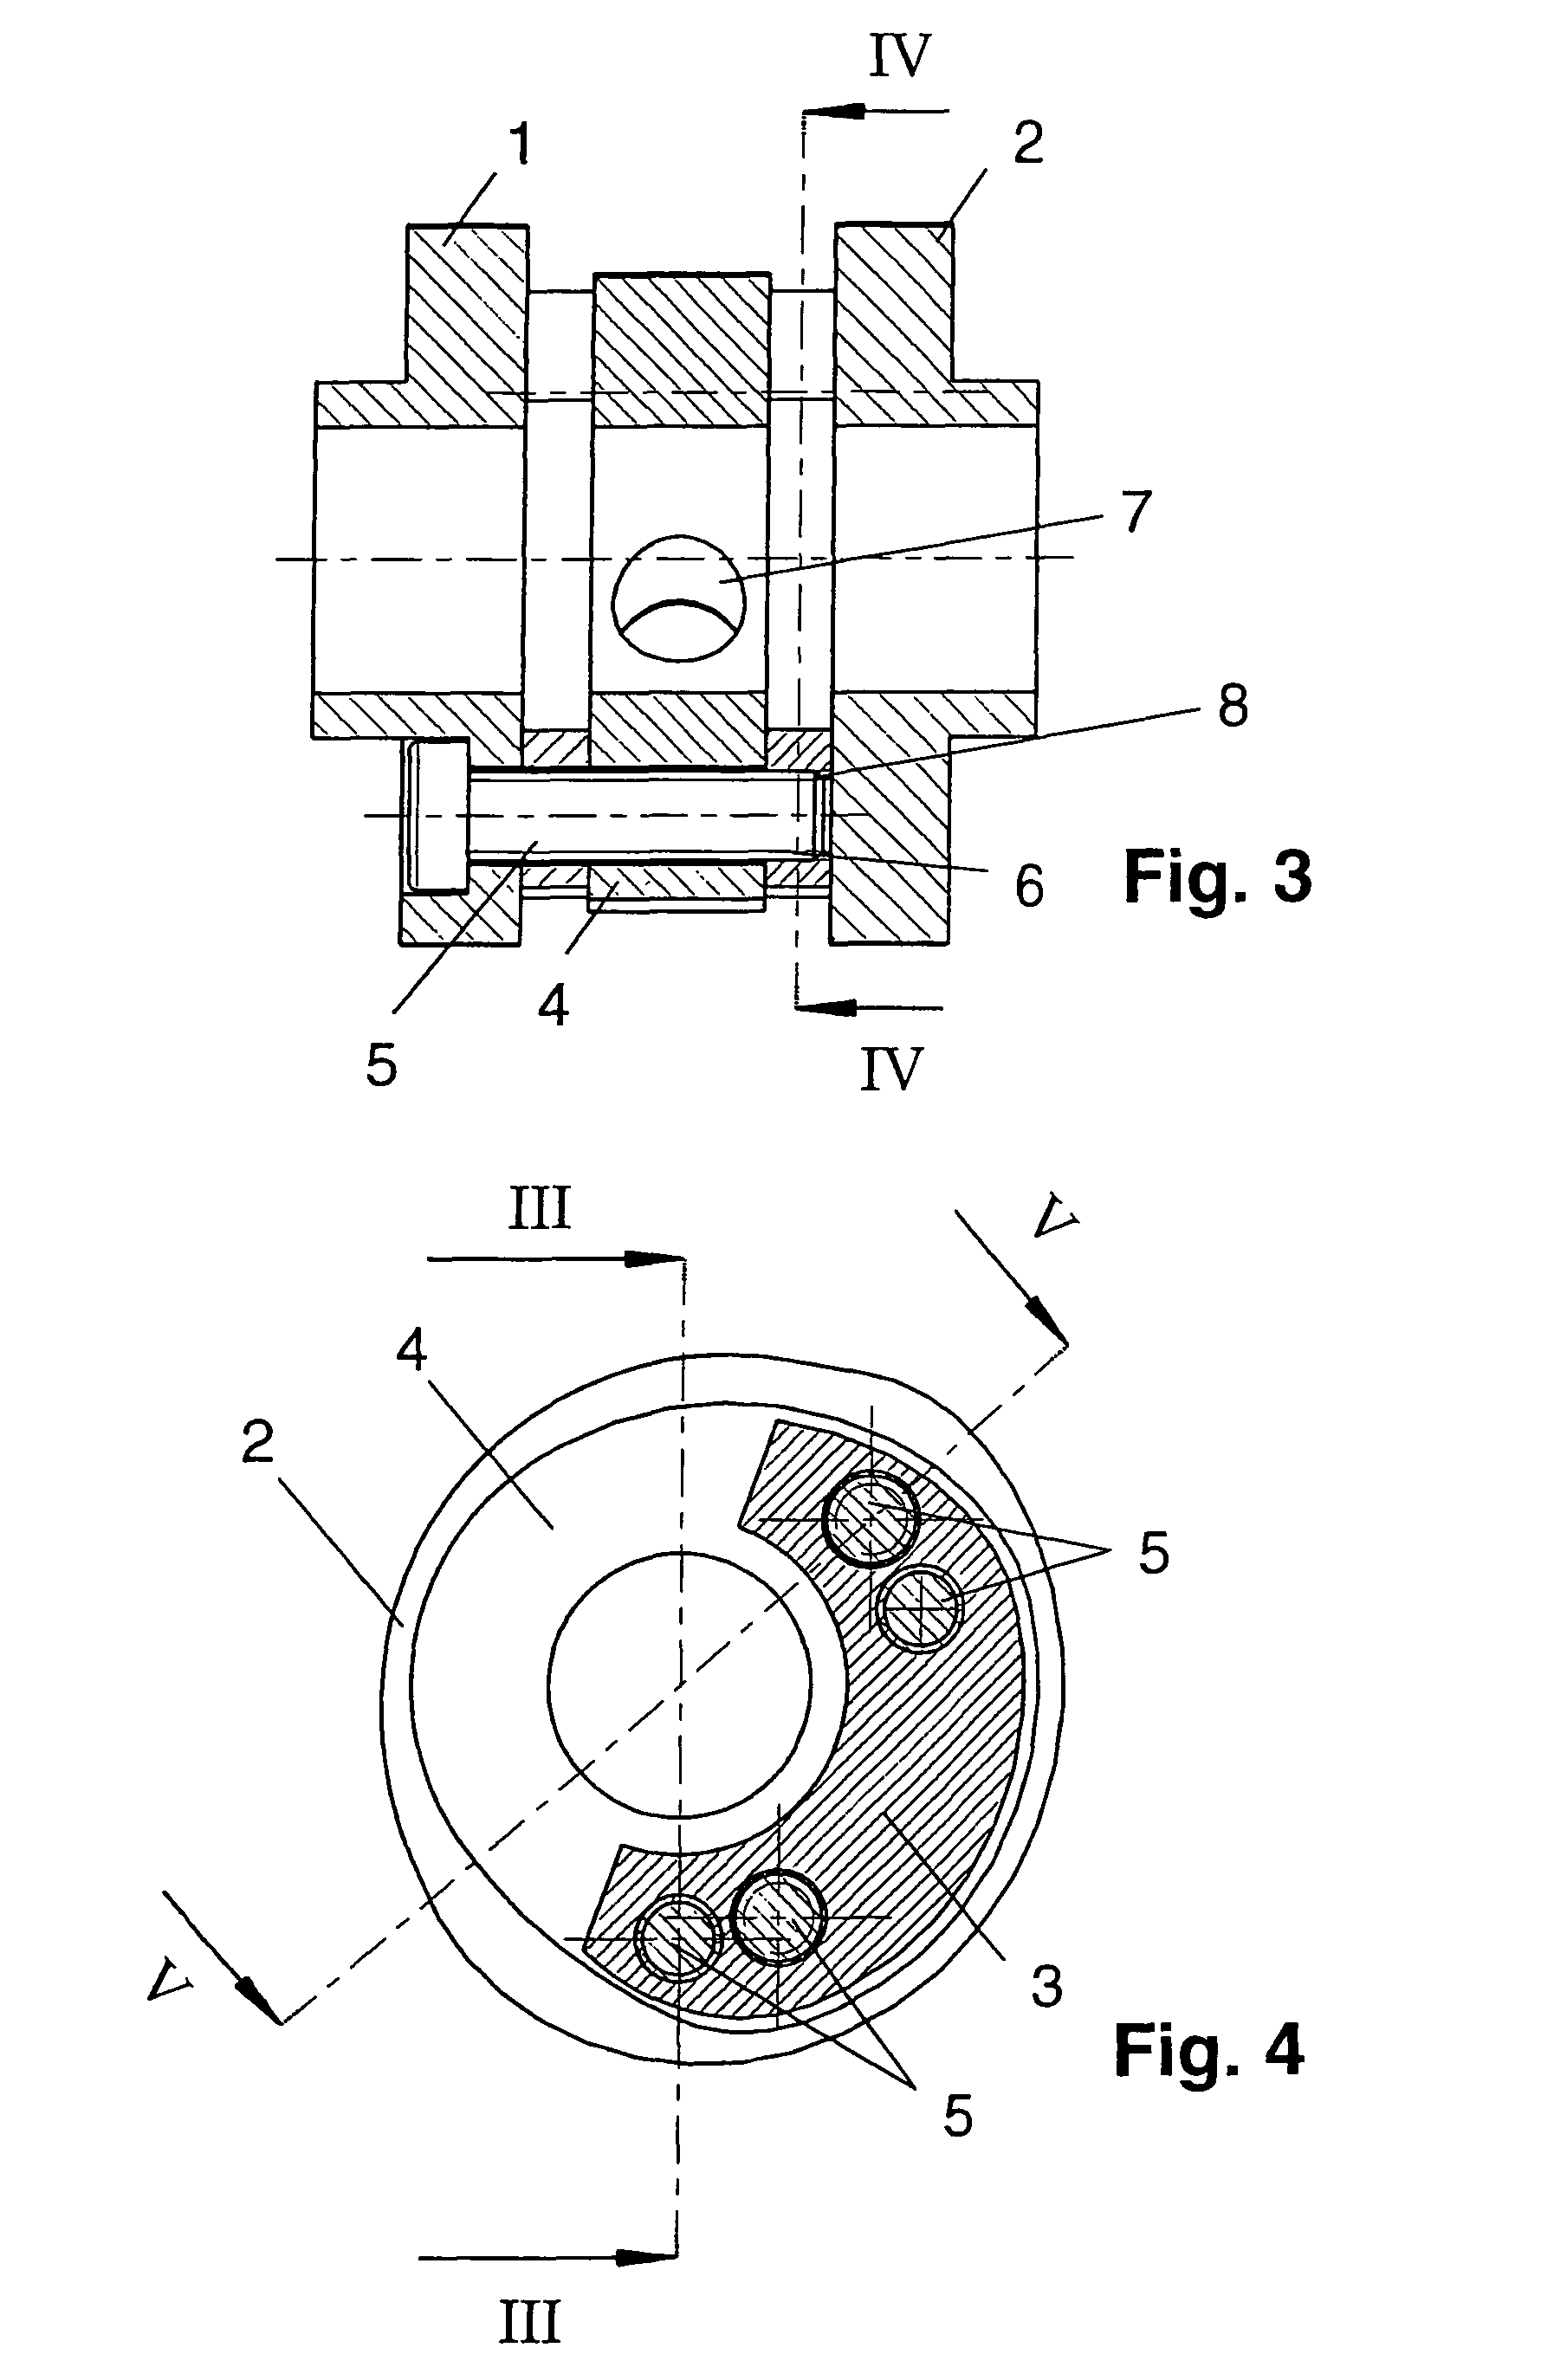 Method for manufacturing a camshaft